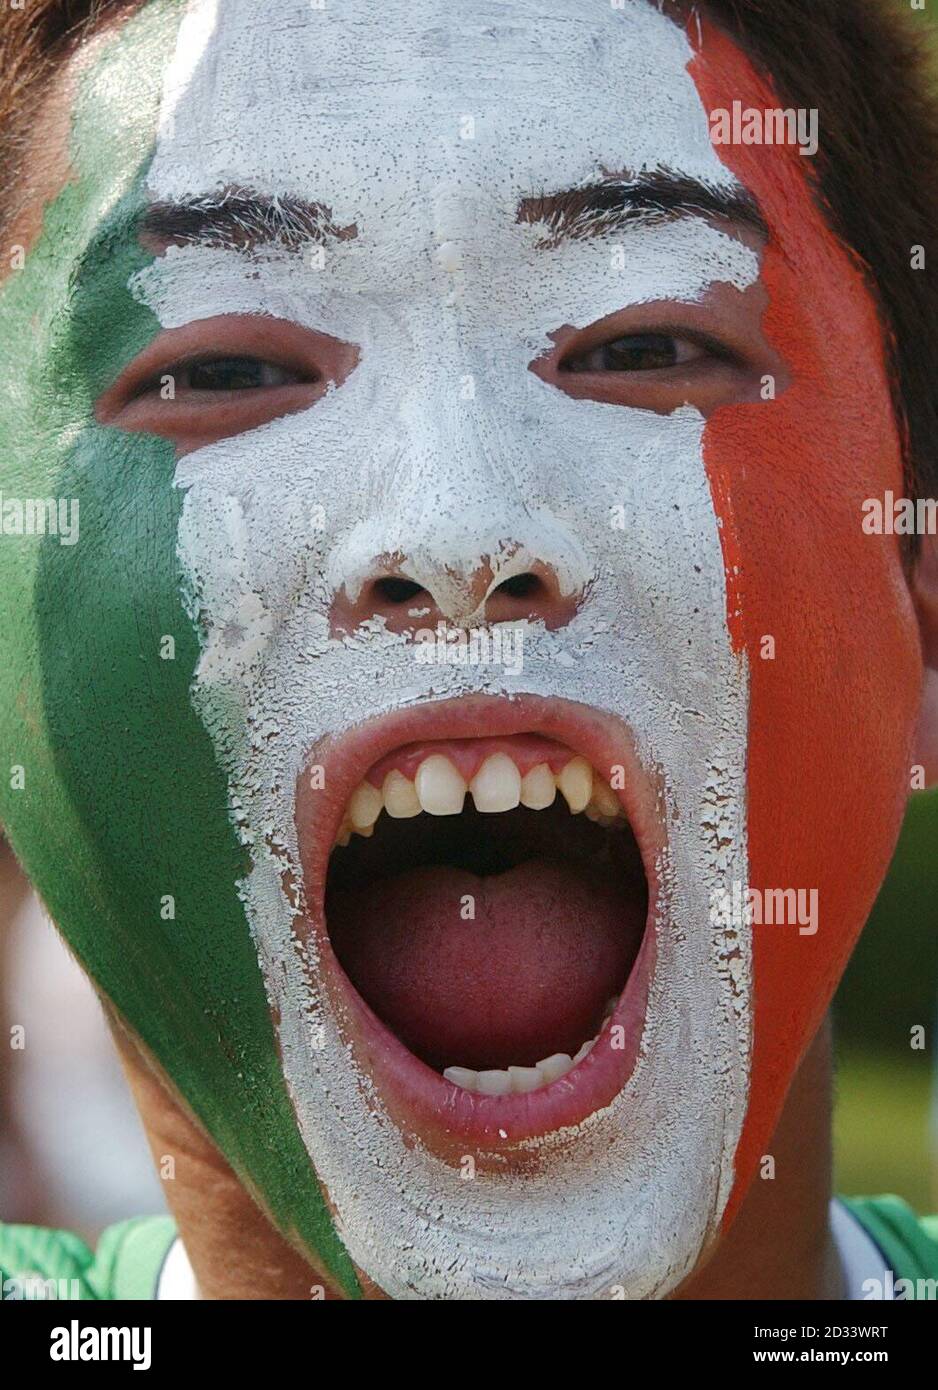 A Japanese fan in Irish facepaint gets ready for the Republic of Ireland clash against Germany, at the Kashima Stadium, Ibaraki, Japan. The Republic of Ireland take on Germany in their second Group E, World Cup Finals match.  * ...  after having drawn their first match against Cameroon 1-1. Stock Photo